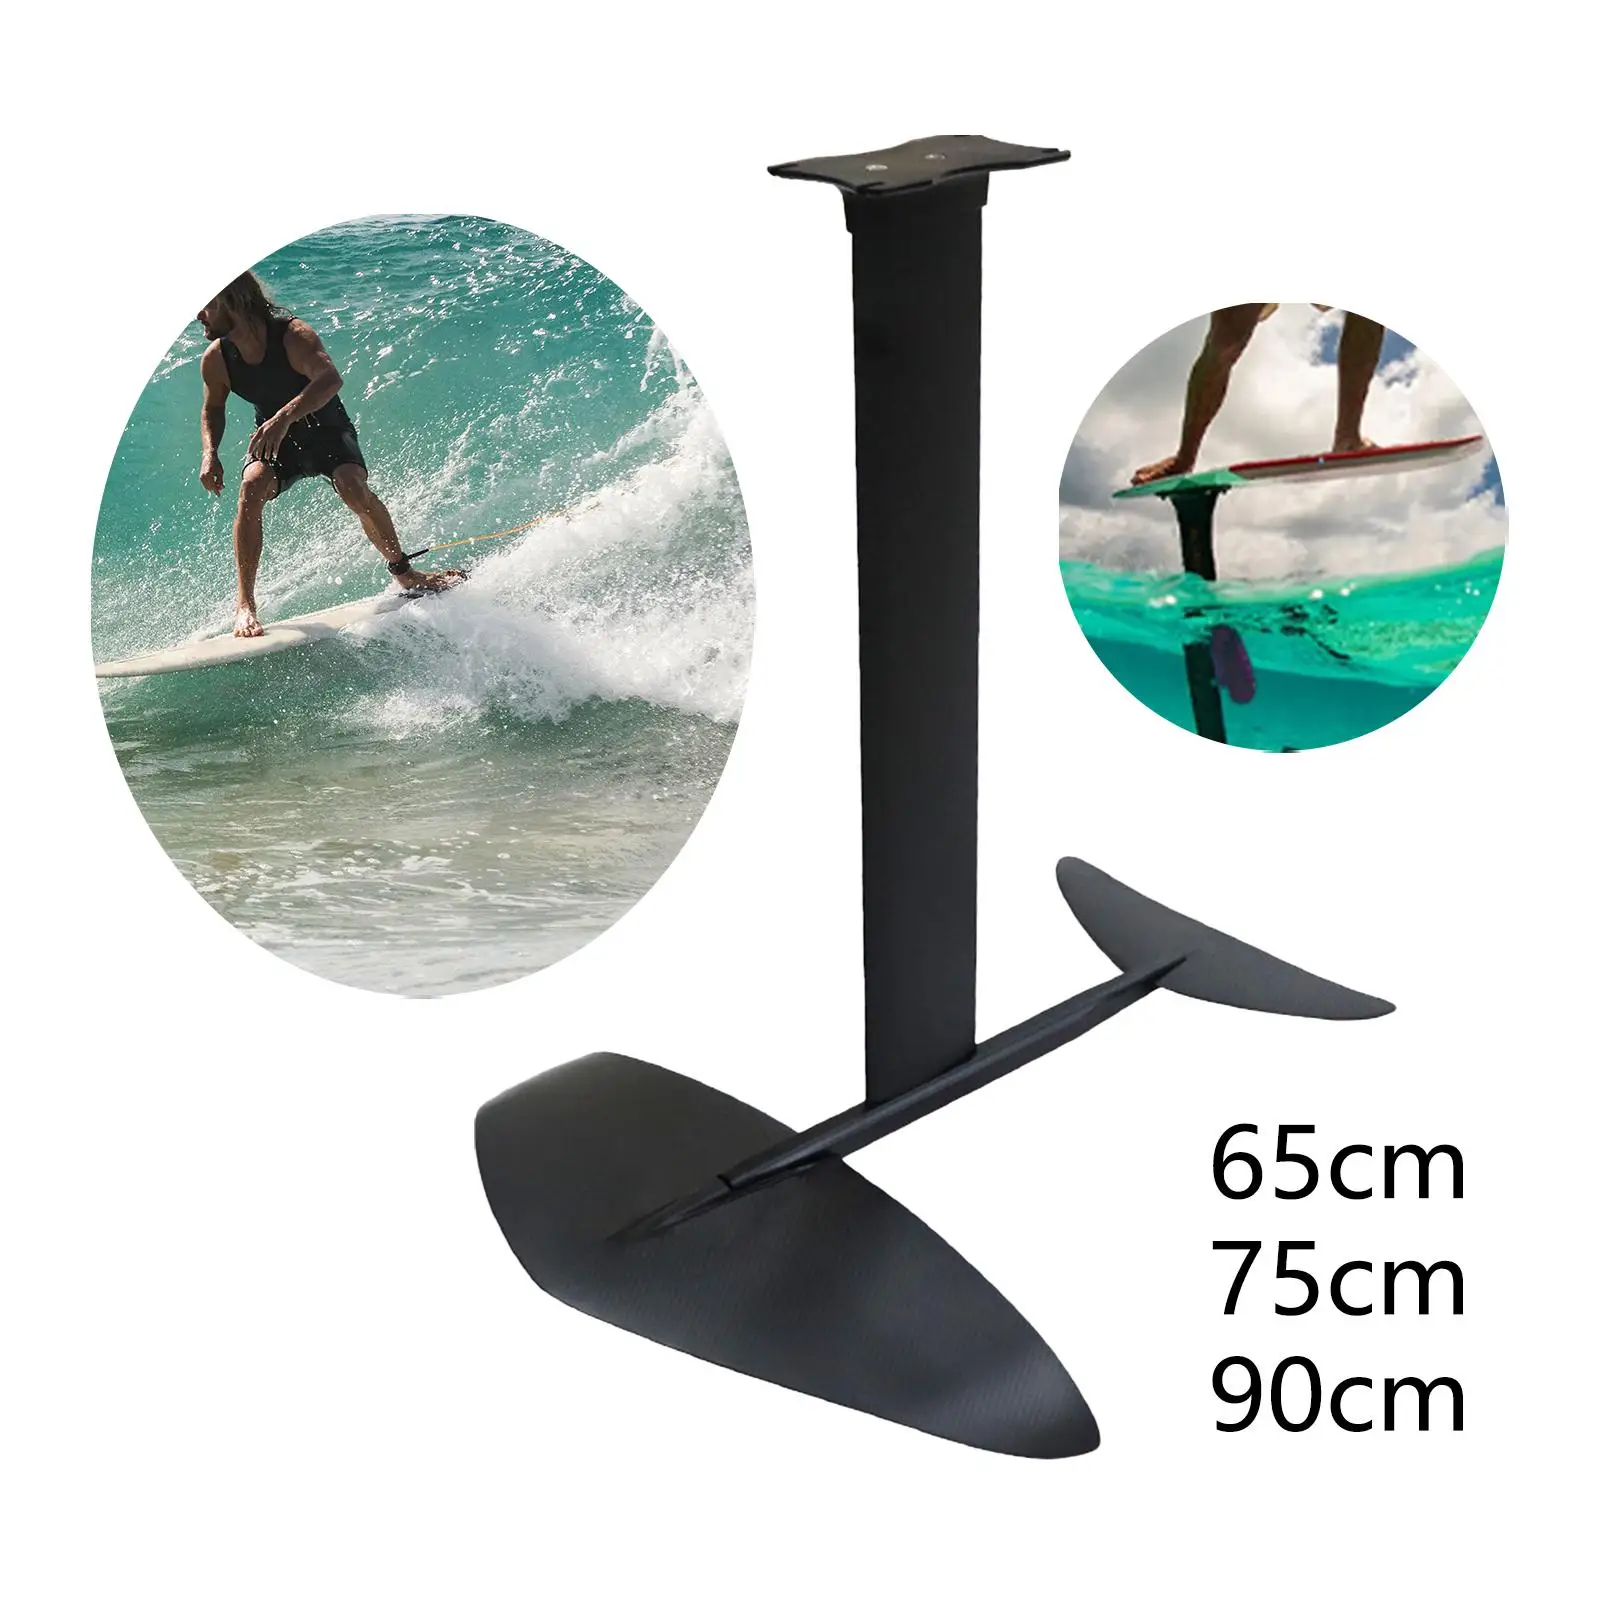 Surfboard Hydrofoil Strong for Outdoor Water Toy Surfing Lovers Paddle Board